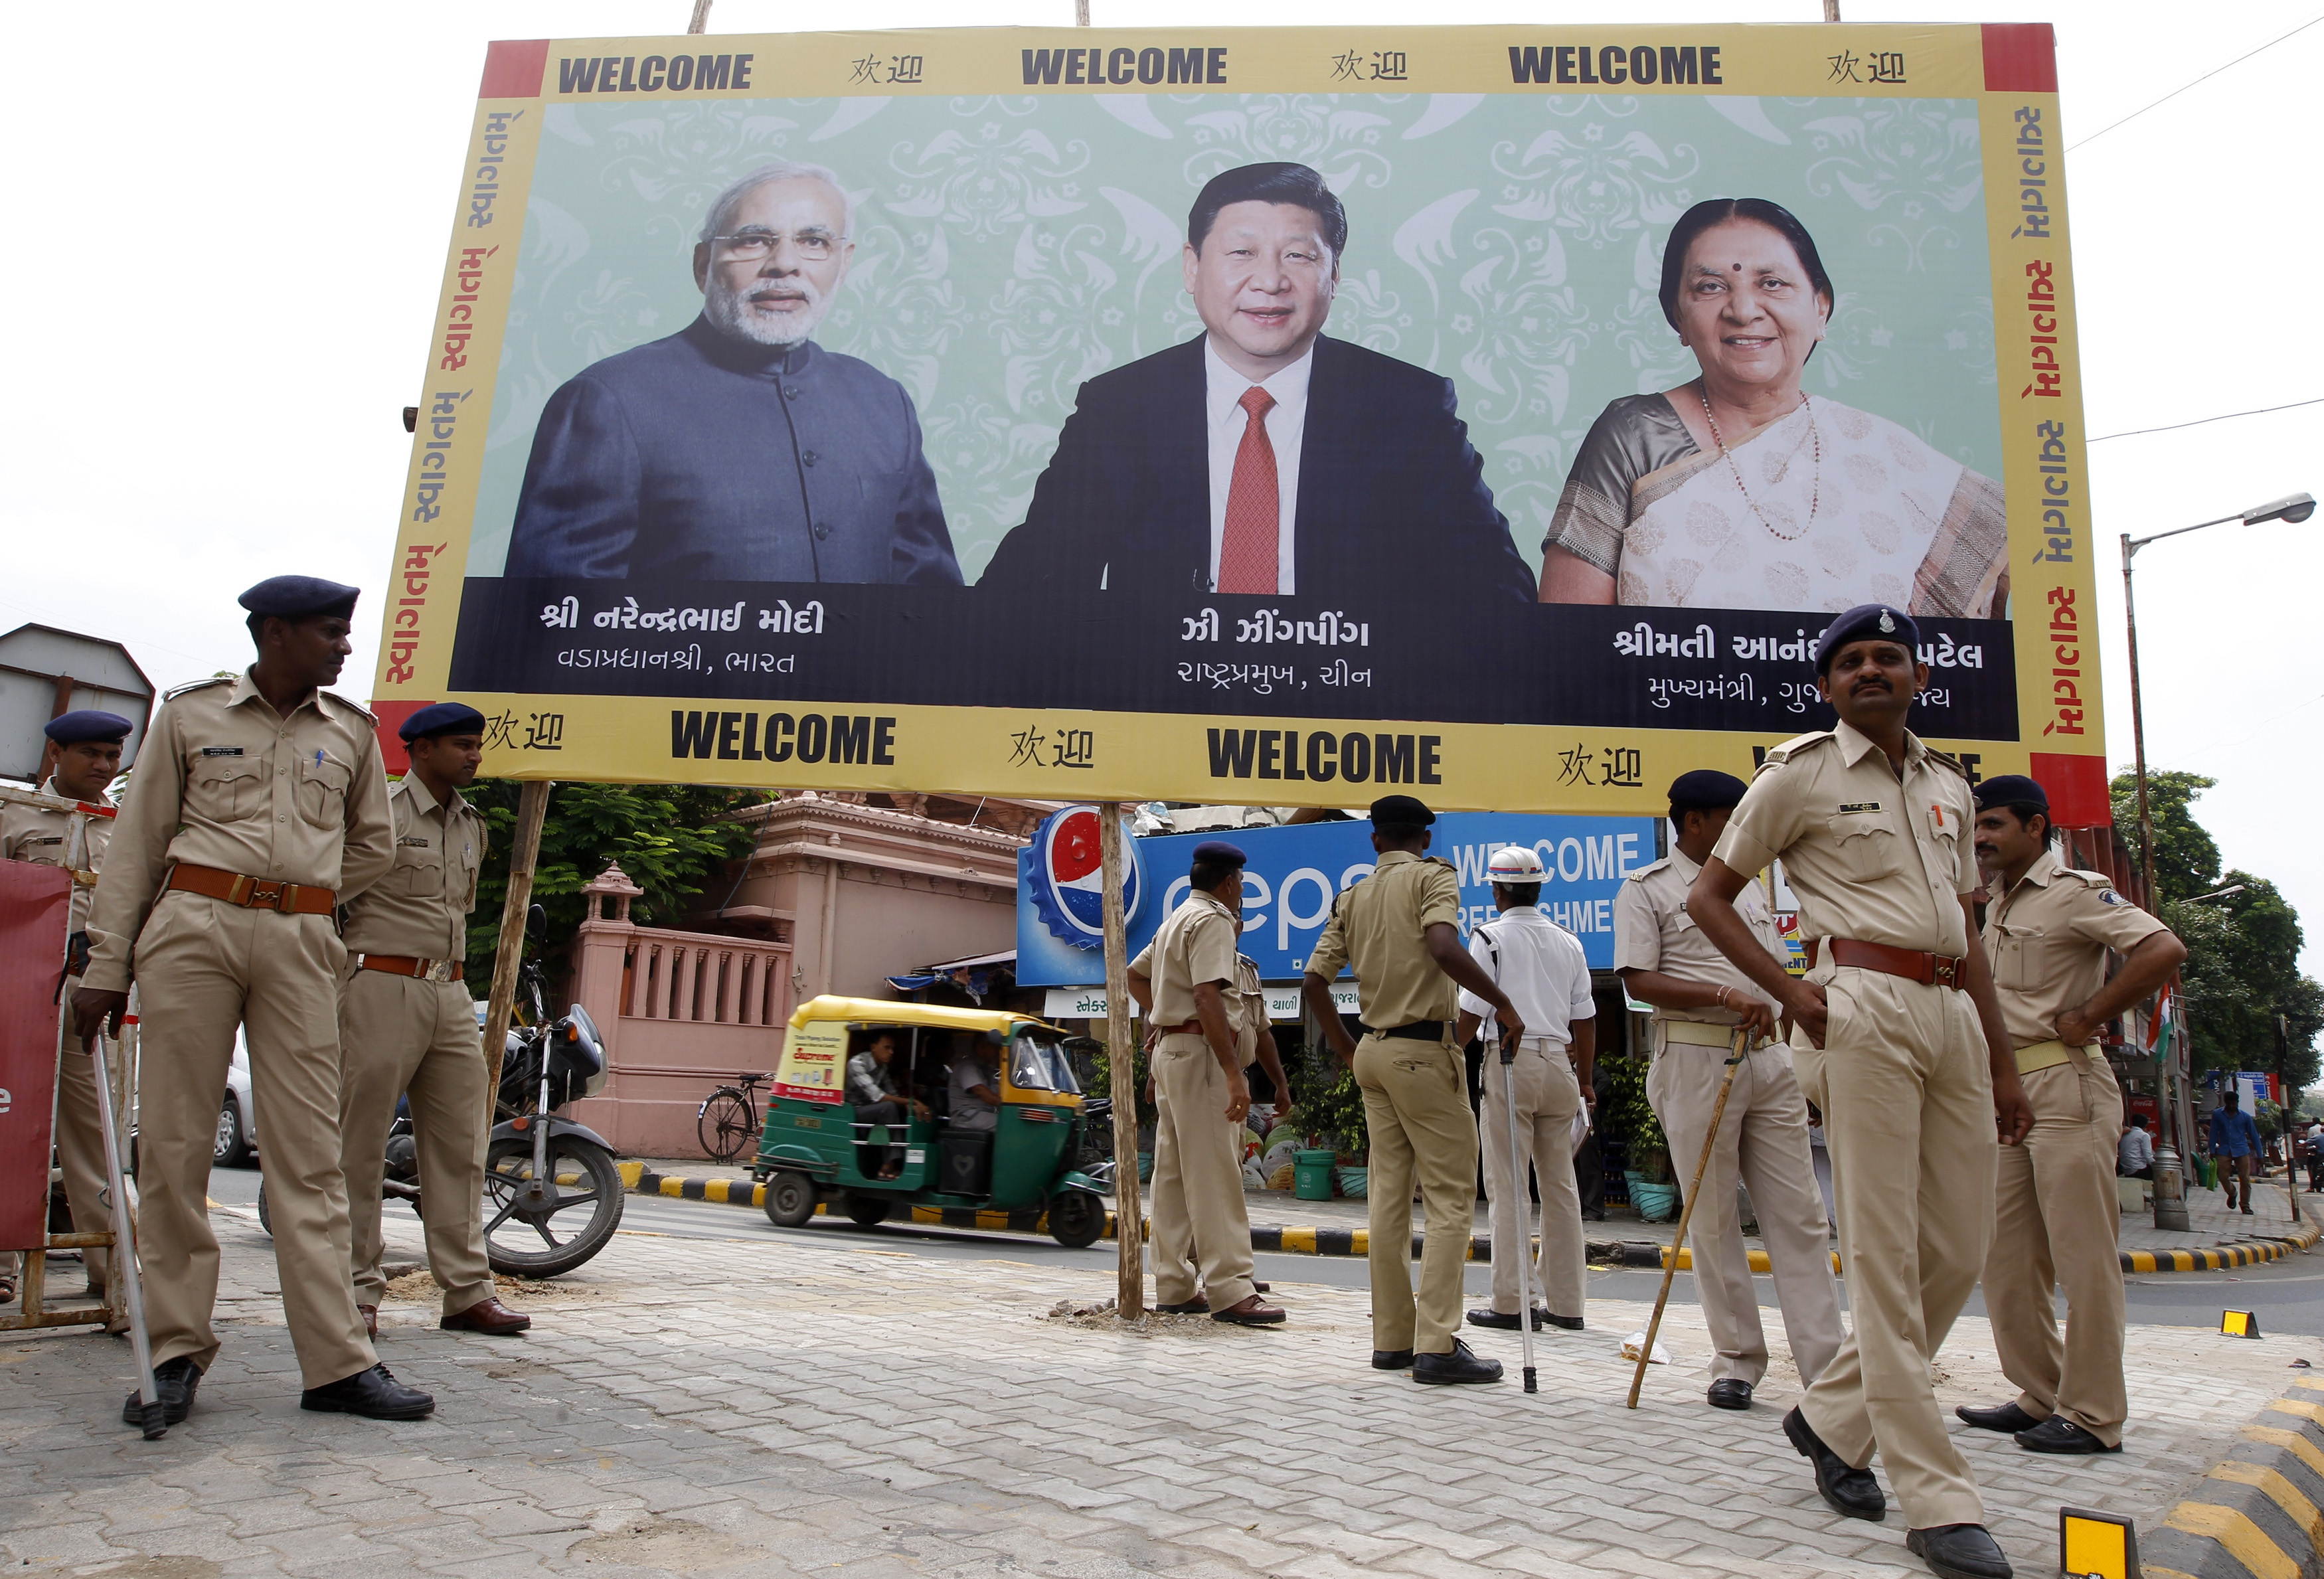 Police personnel stand guard on Sept. 16, 2014, in front of a billboard with images of, from left to right, Indian Prime Minister Narendra Modi, Chinese President Xi Jinping and Gujarat Chief Minister Anandiben Patel ahead of Xi's arrival in Ahmedabad (Amit Dave—Reuters)